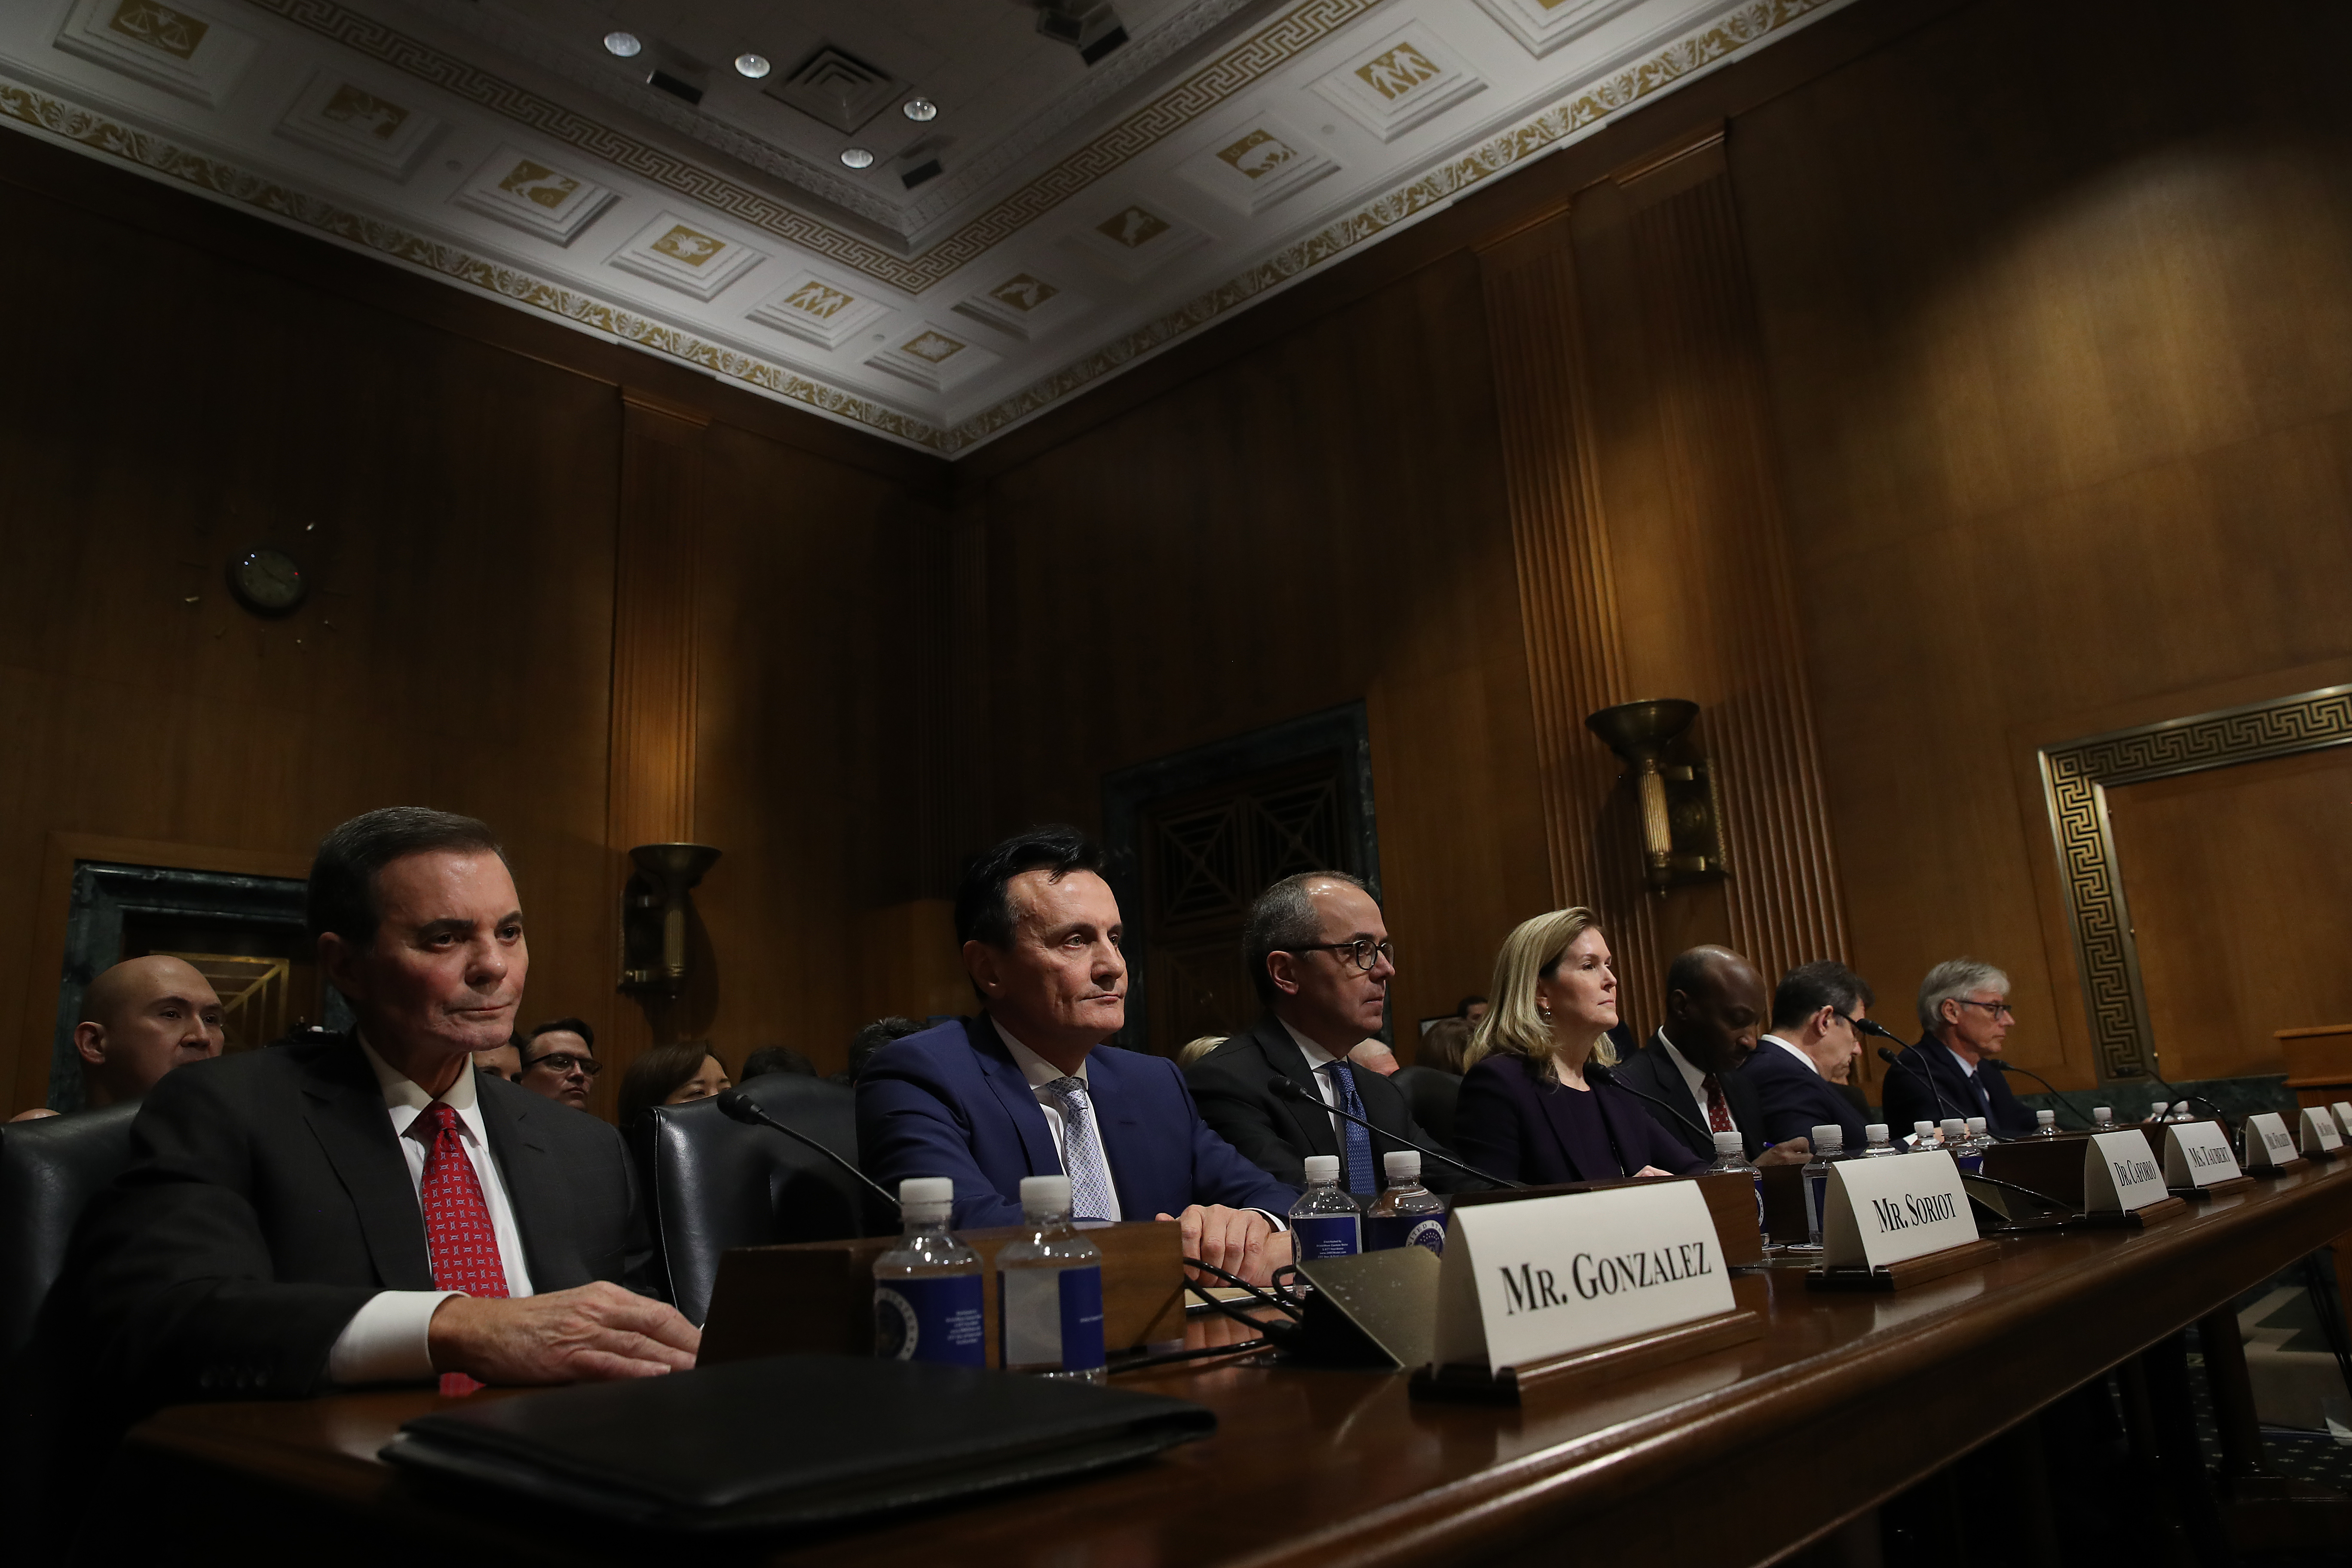 Chief Executive Officers of pharmaceutical companies testify before the Senate Finance Committee on "Drug Pricing in America: A Prescription for Change, Part II" February 26, 2019 in Washington, DC. (Photo by Win McNamee/Getty Images)